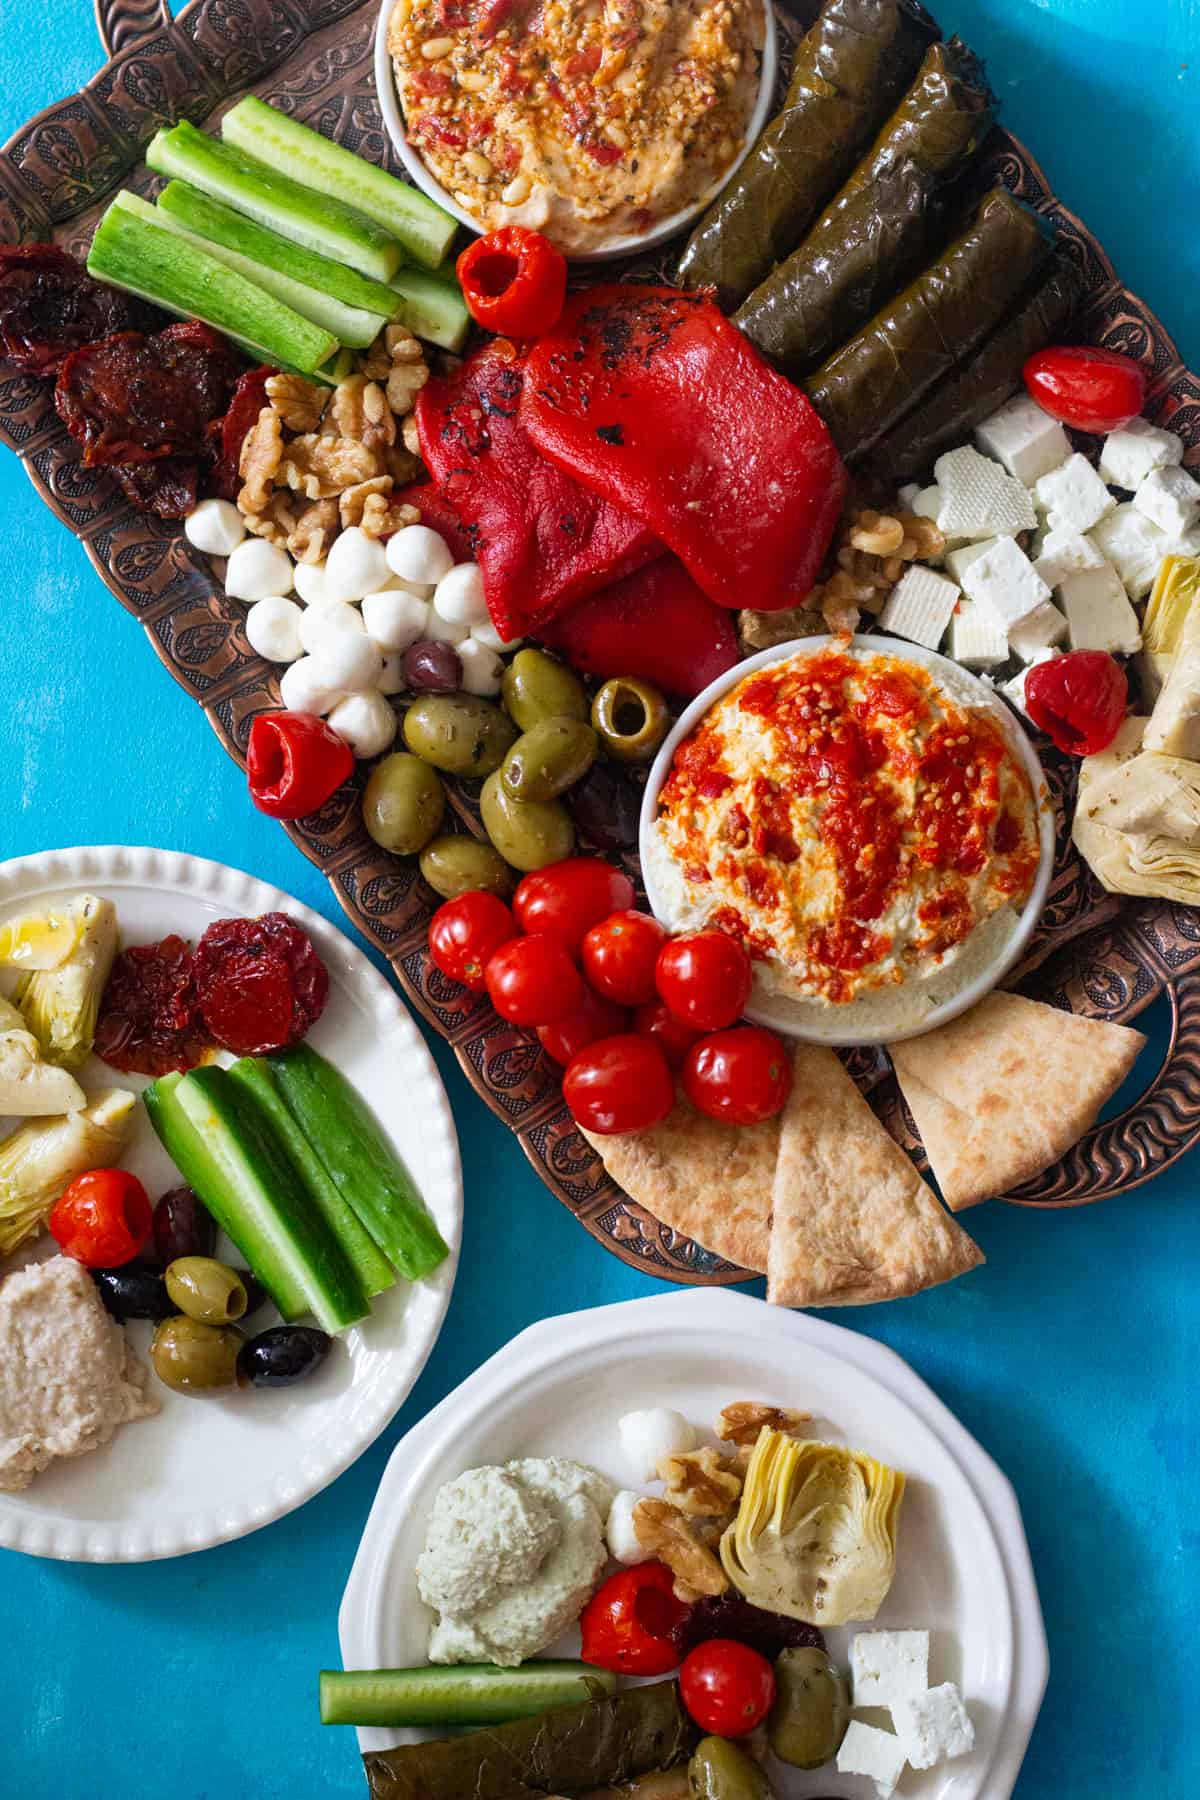 Mezze platter takes your appetizer game to a whole new level. This Mediterranean platter is a showstopper at any gathering and it's so simple to make.